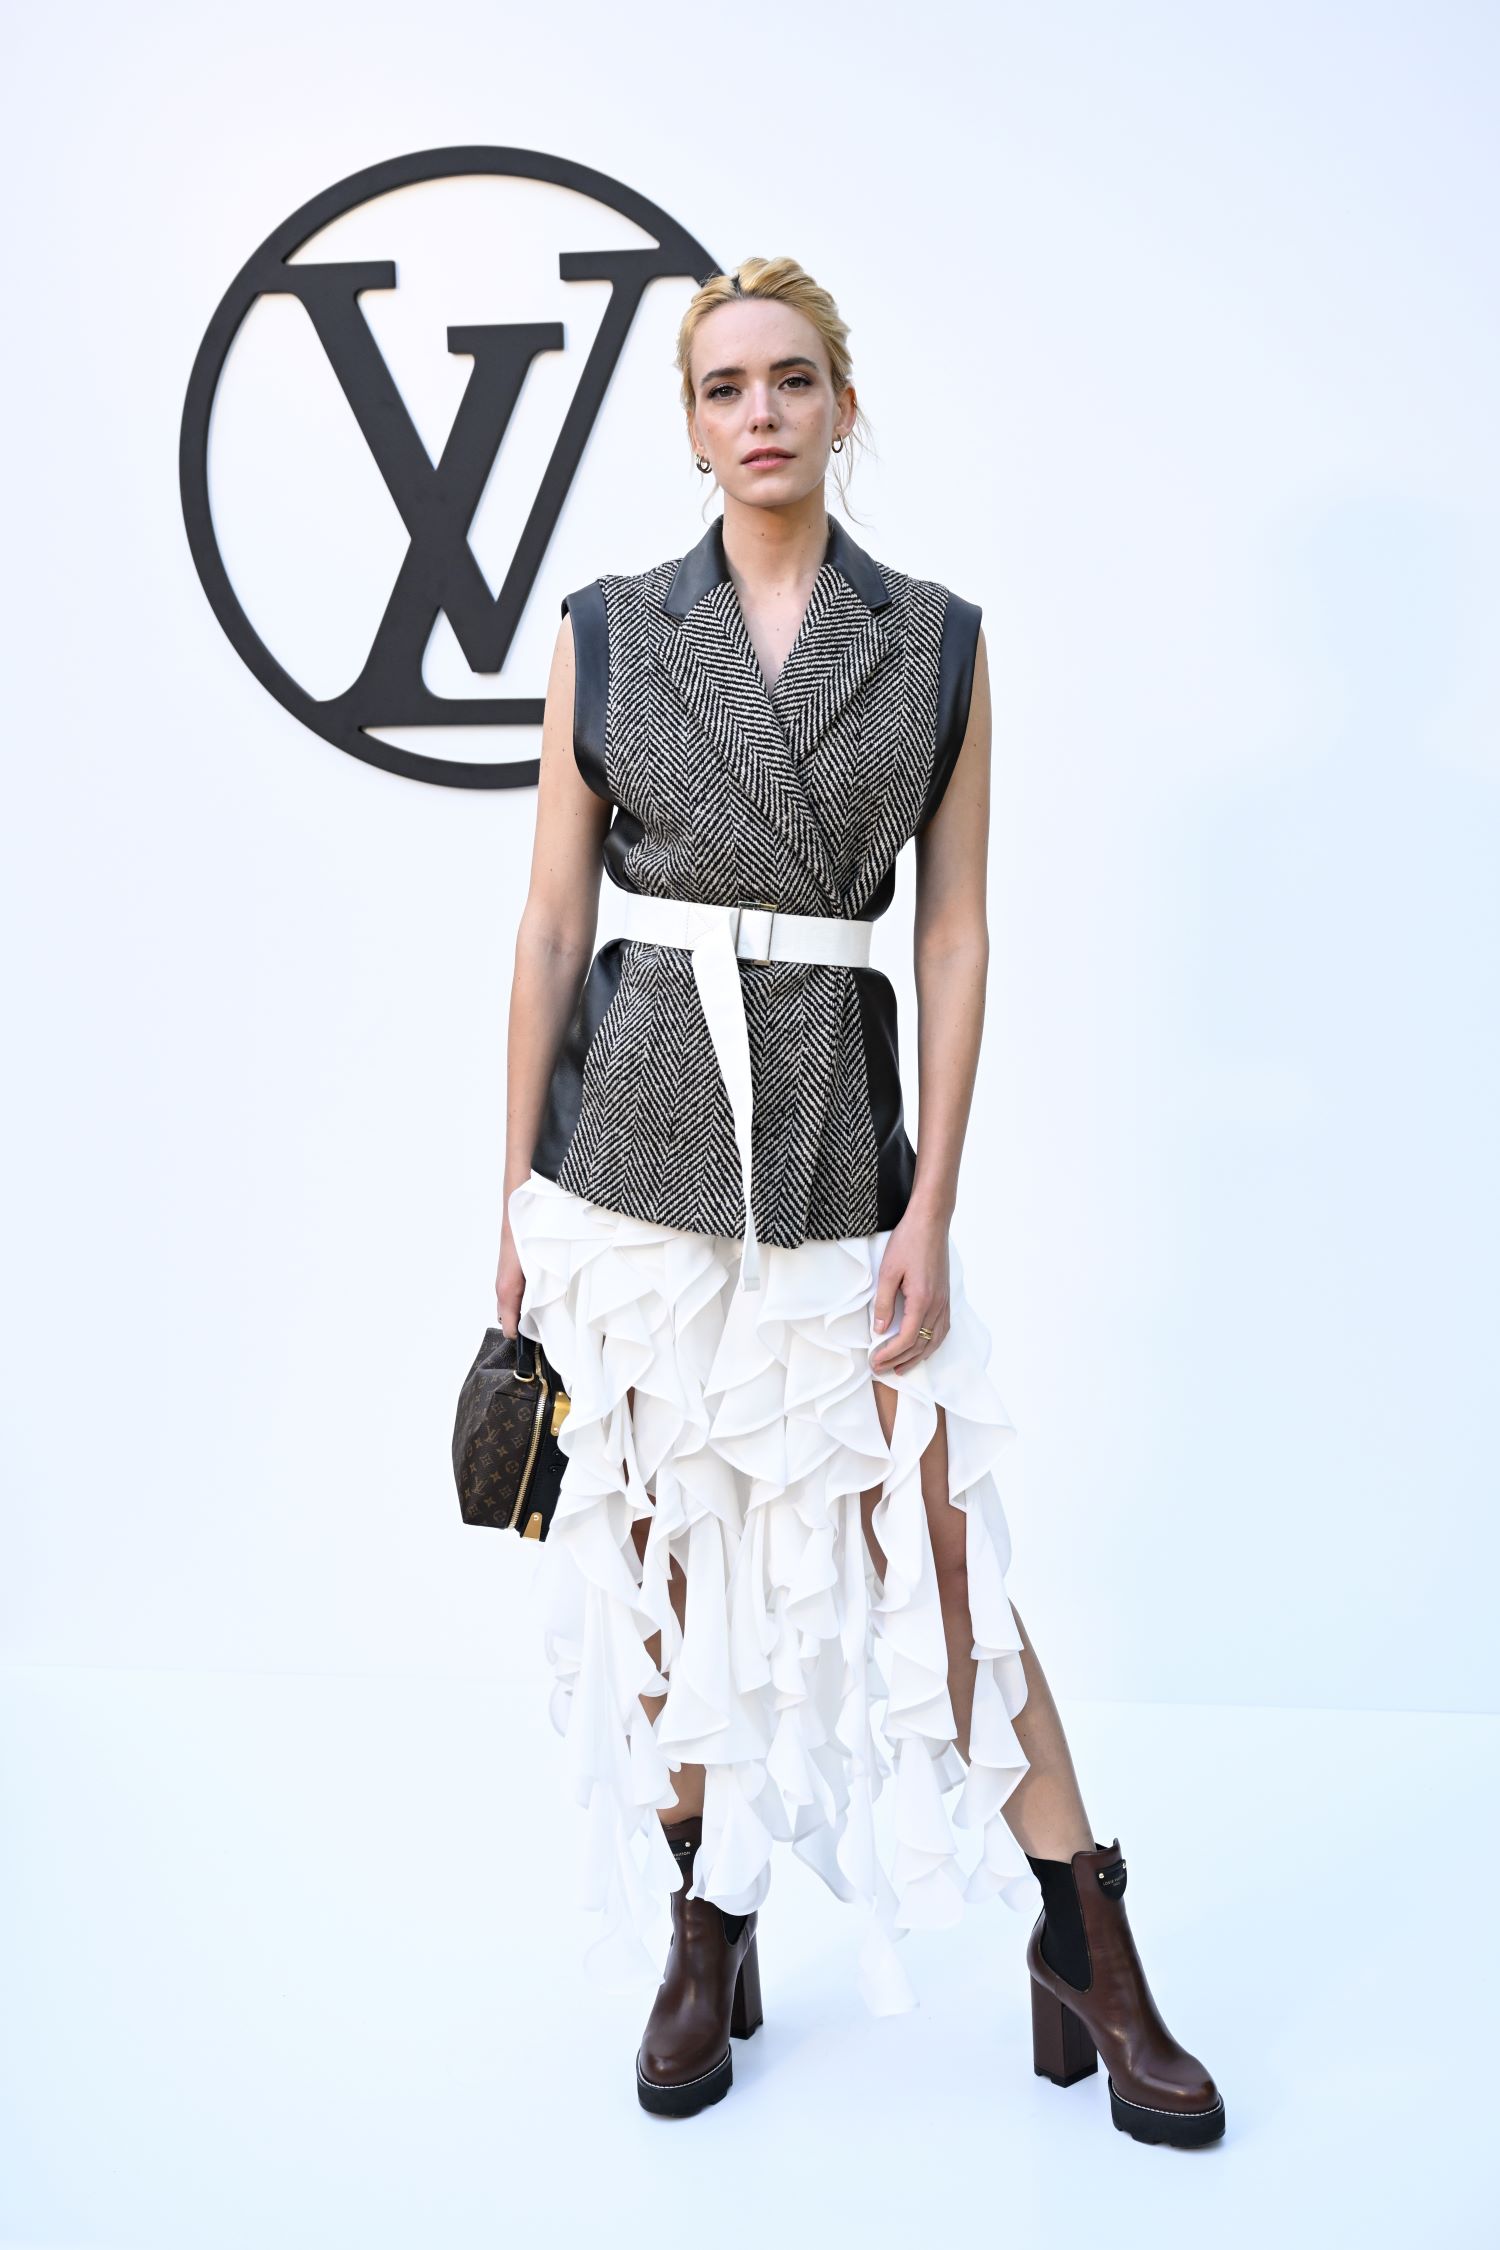 STACY MARTIN attending the Cruise 2025 Fashion Show by Louis Vuitton in Barcelona | CRUISE 2025 FASHION SHOW COLLECTION © Louis Vuitton – All rights reserved | Courtesy of Gnazzo Group.